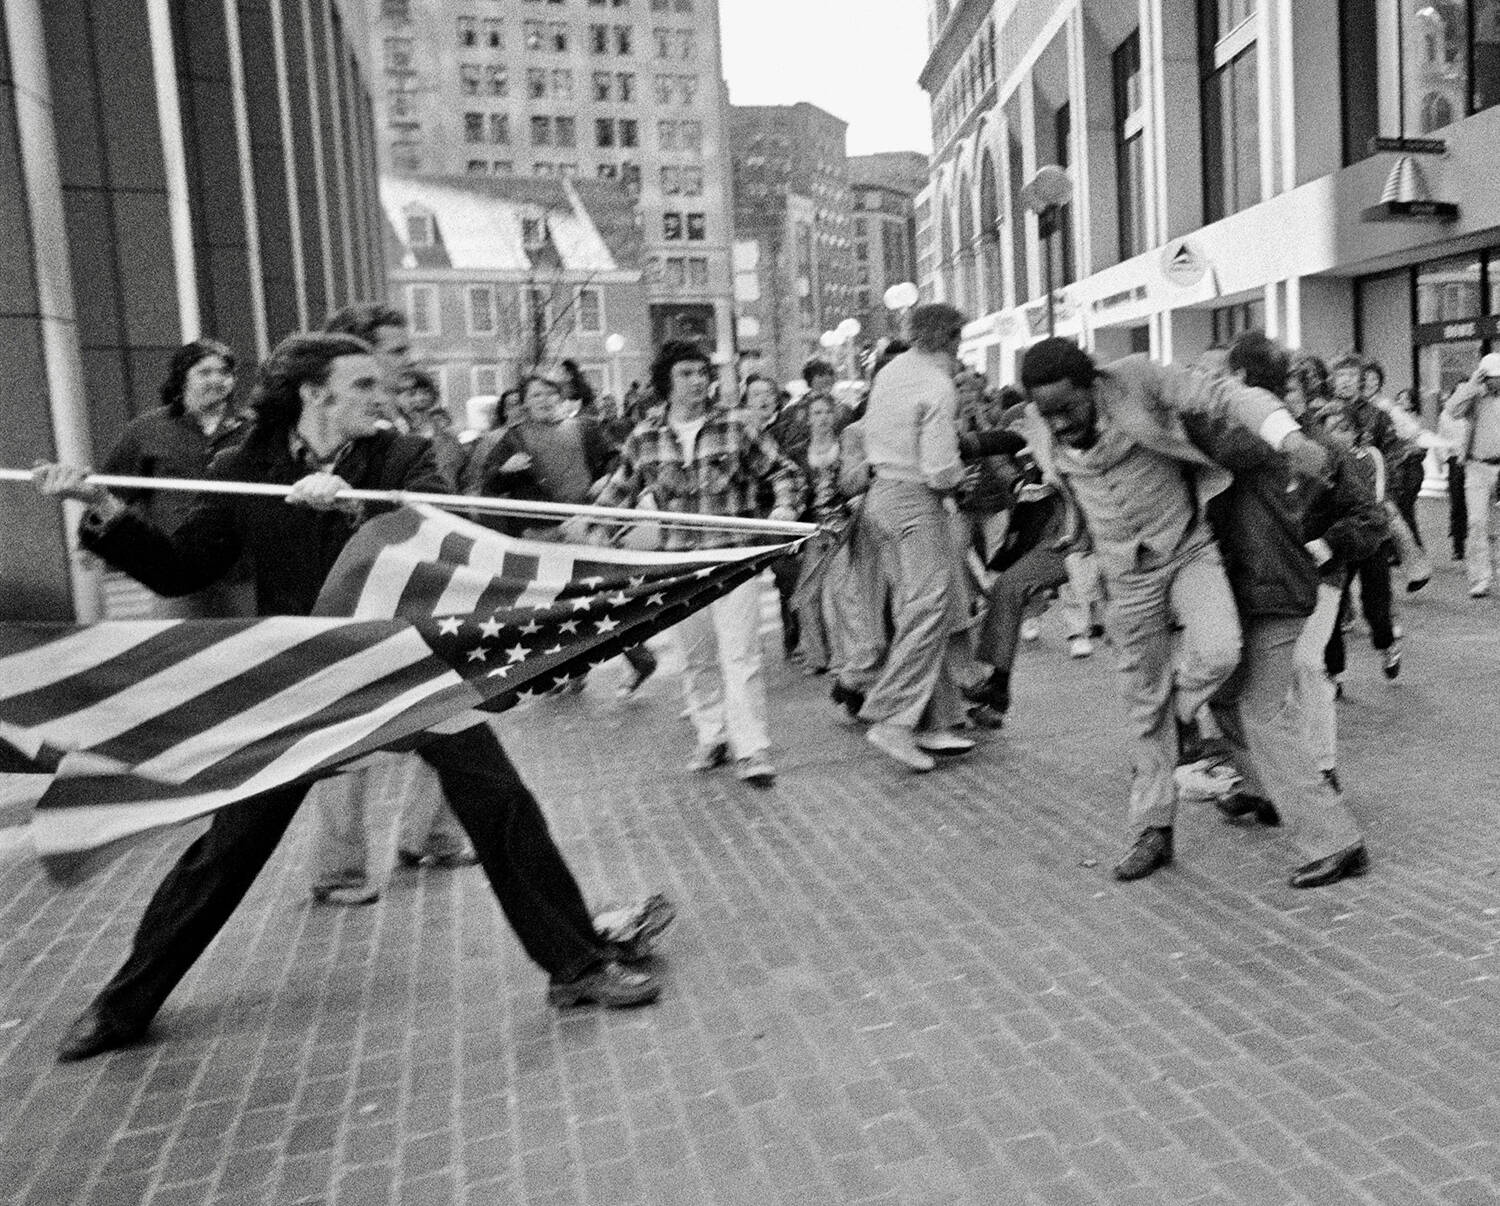 In this photograph titled "The Soiling of Old Glory," Joseph Rakes assaults lawyer and civil rights activist Ted Landsmark with a flagpole bearing the American flag. (Stanley Forman)